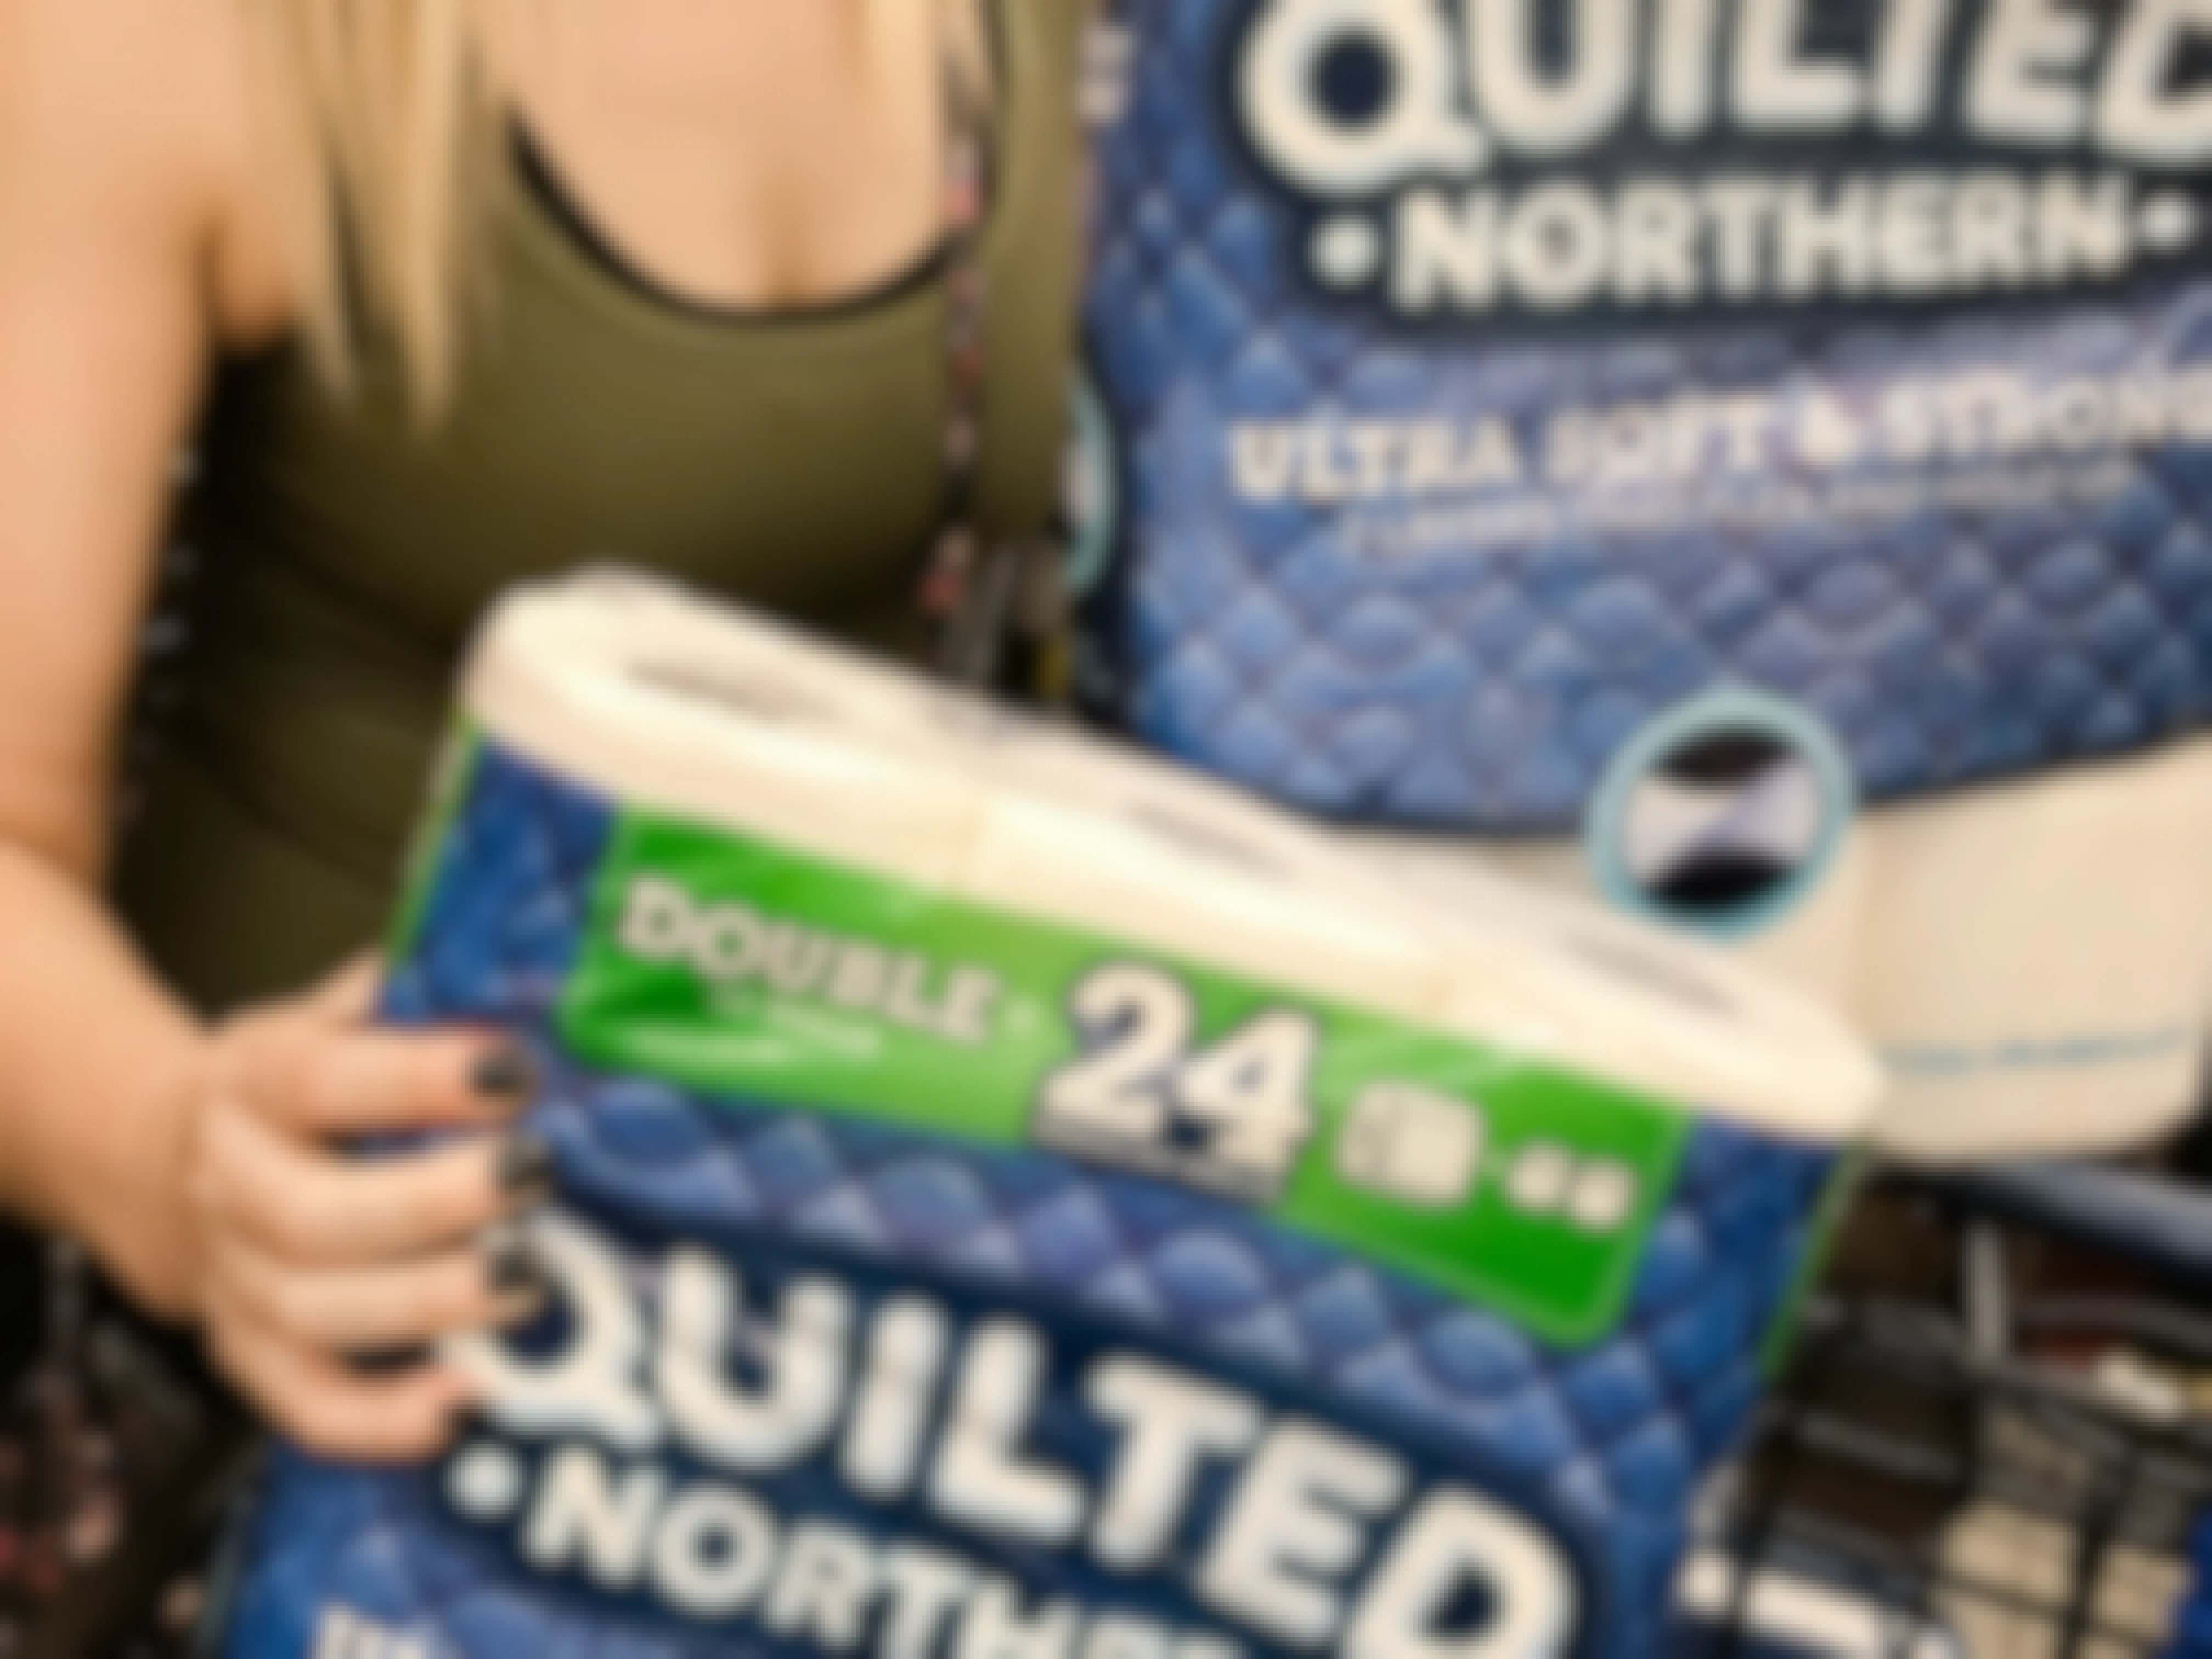 Woman holding two packs of Quilted Northern toilet paper